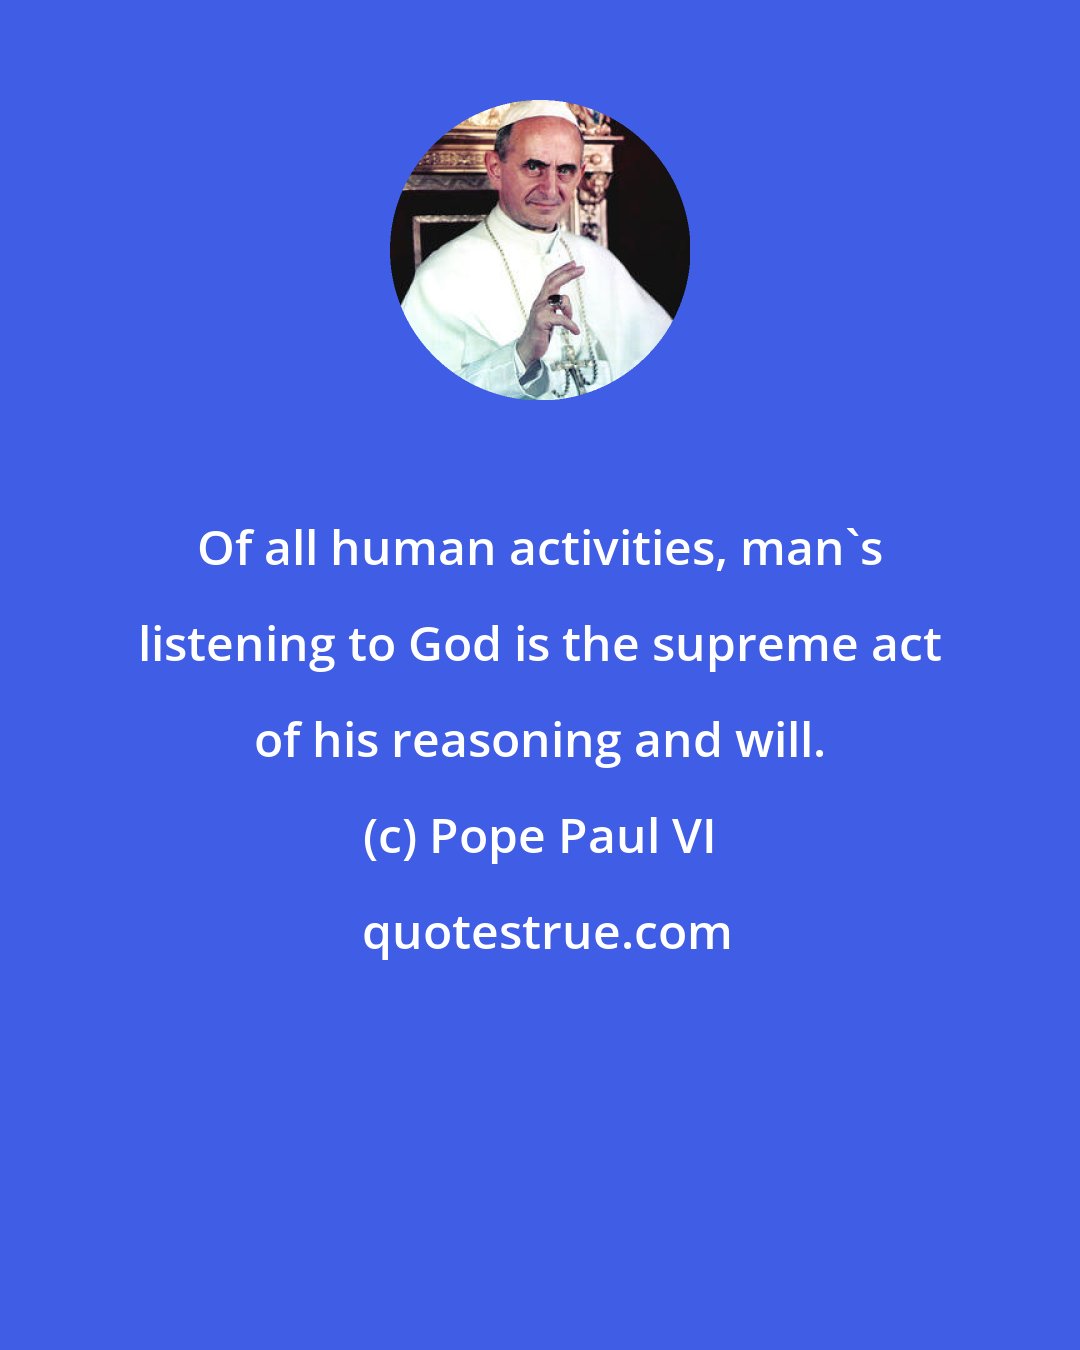 Pope Paul VI: Of all human activities, man's listening to God is the supreme act of his reasoning and will.